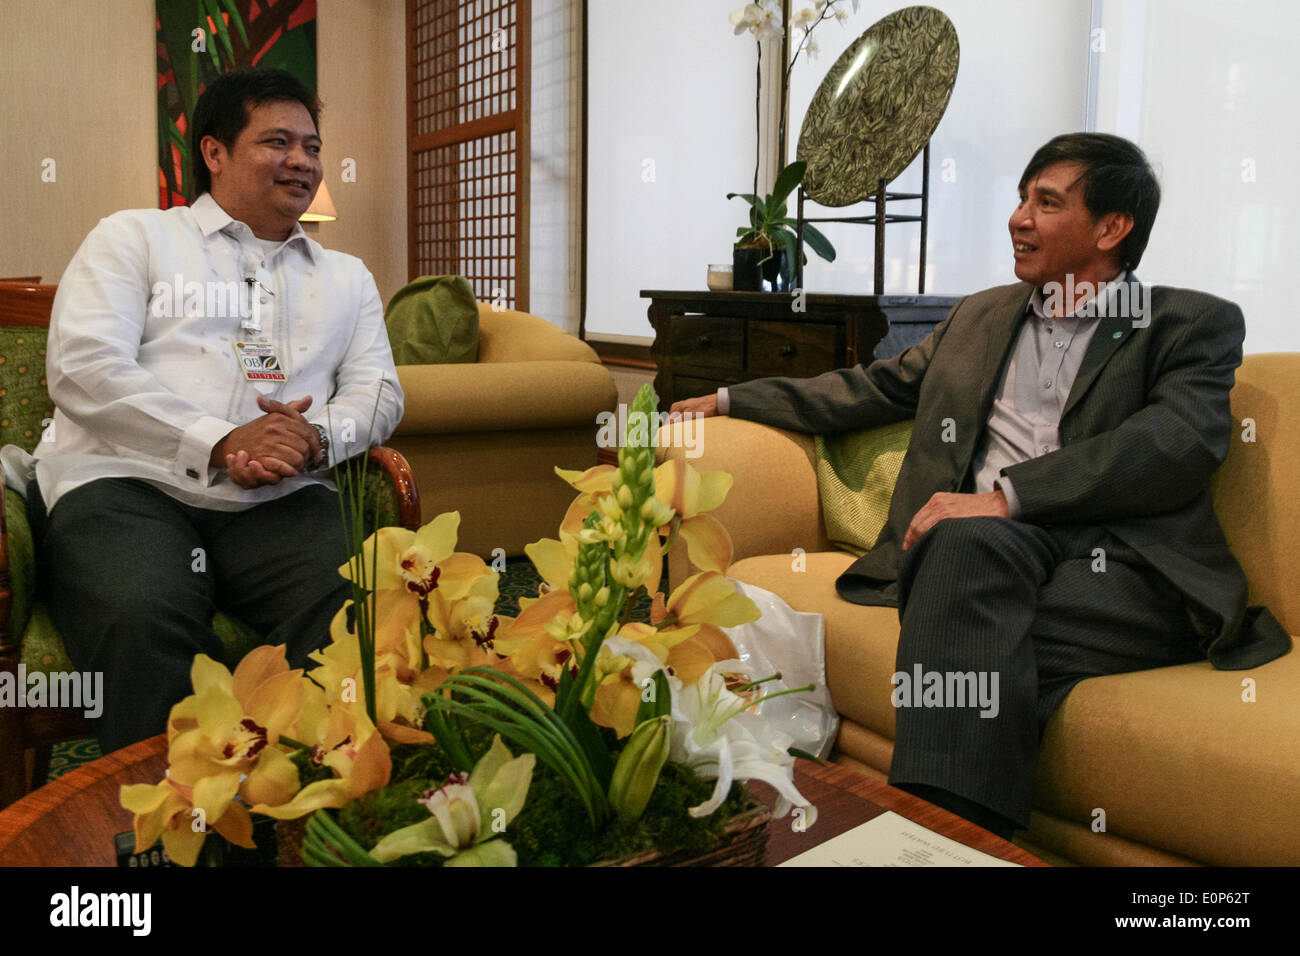 MANILA, PHILIPPINES - MAY 18: Vietnamese Vice Minister of Finance Truong Chi Trung (R) and Philippine Department of Finance International Policy Offices Director, Jun C. Runas chat at the VIP Lounge of the Ninoy Aquino International Airport in Manila. As one of the most awaited representatives for the World Economic Forum, and with the recent tension against China, the Finance Vice Minister is expected to discuss current economic issues with his Philippine counterparts. (Photo by J Gerard Seguia/Pacific Press) Stock Photo